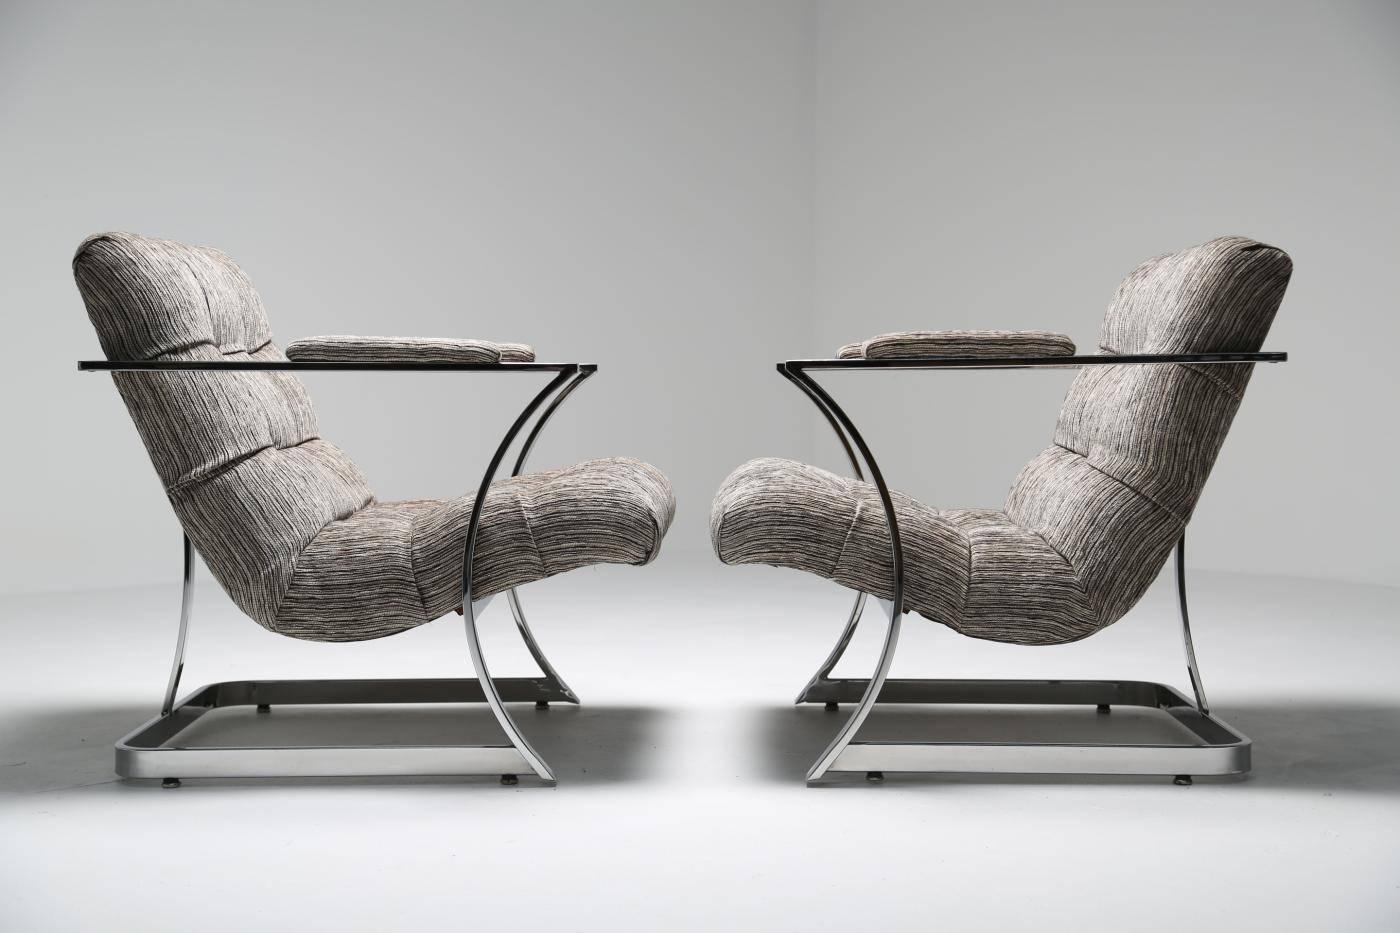 A pair of very sculptural chrome lounge chairs in the style of Milo Baughman. Made with curved flat bar chrome-plated steel and upholstered in a nubby grey fabric. Easily shipped anywhere in the world.